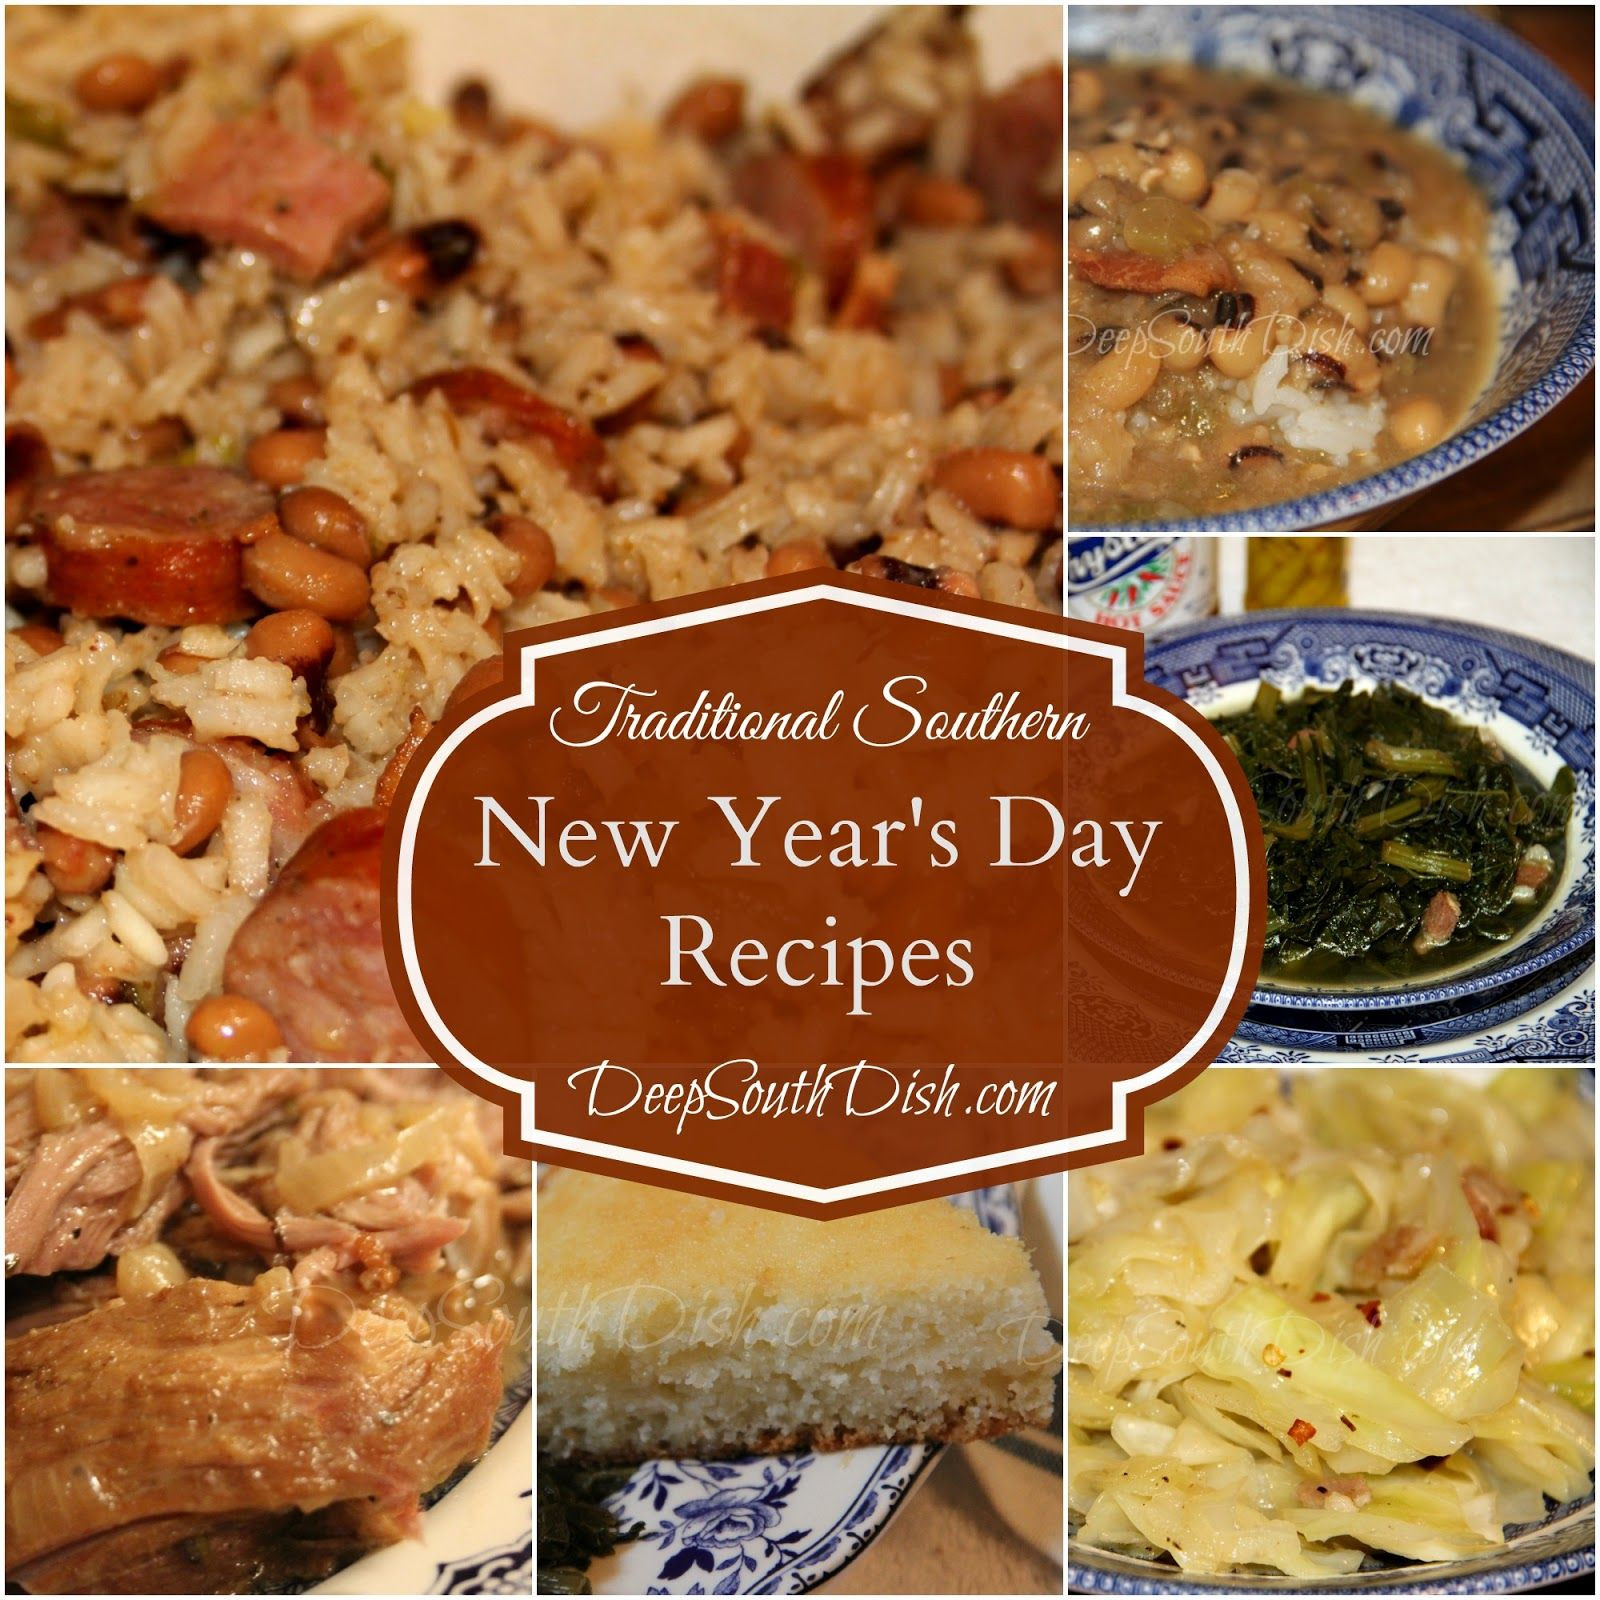 Traditional New Year'S Day Desserts
 Traditional Southern New Year s Day Recipes